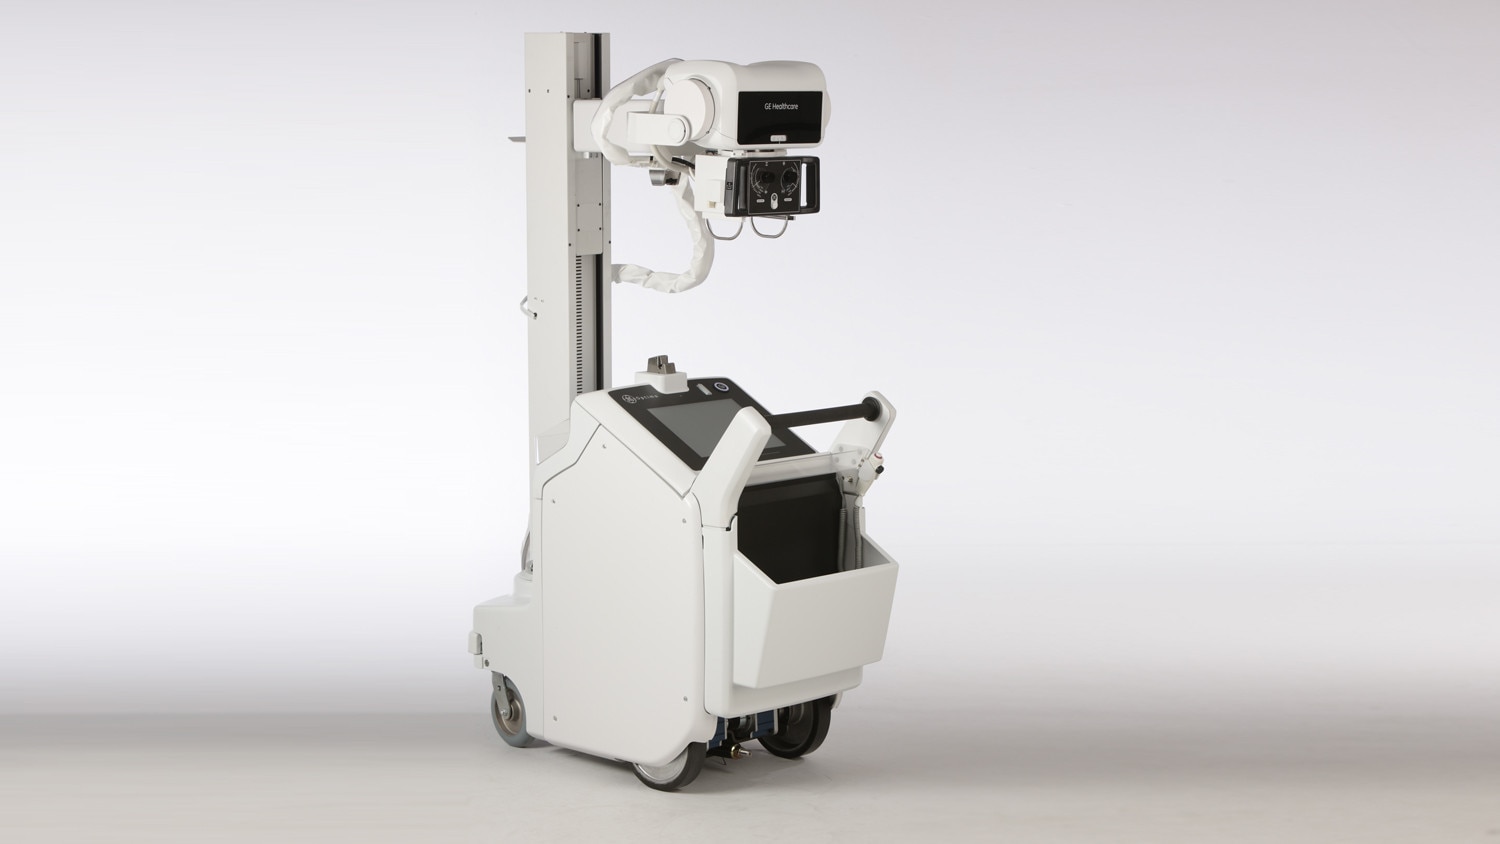 product-product-categories-radiography-optima xr200amx-oxr200amx_unit_jpg